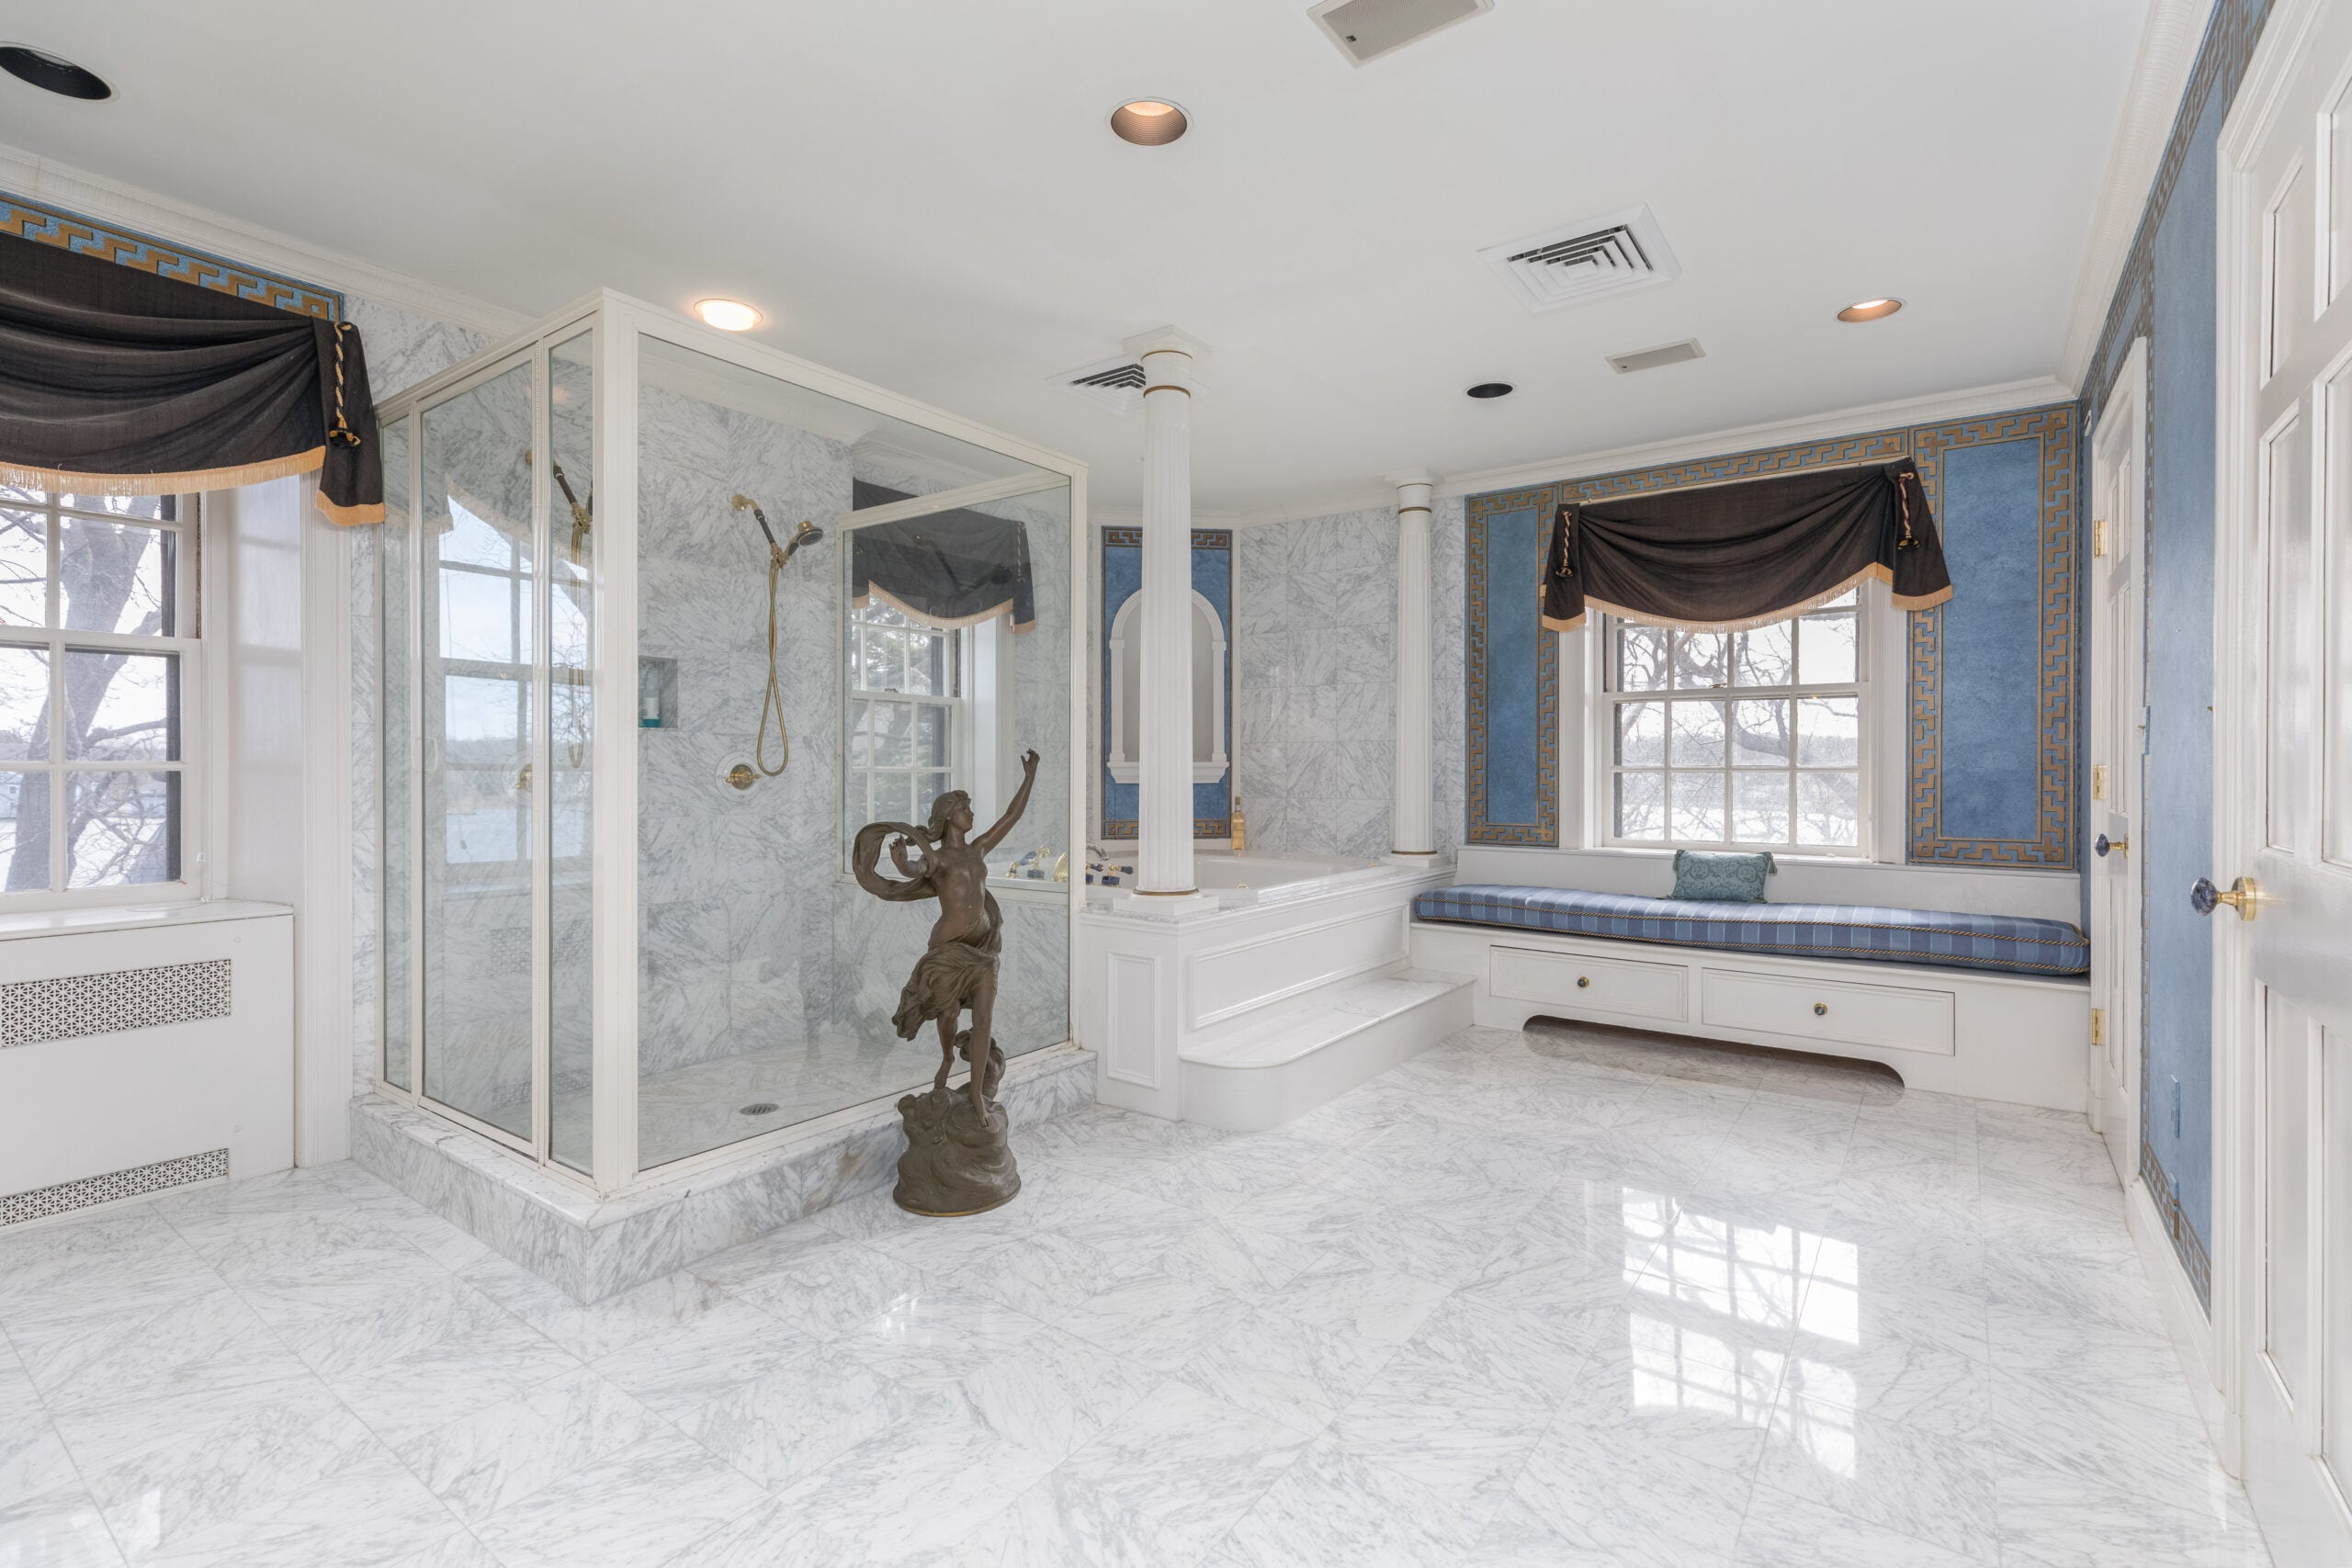 A statue sits in the background of a marble bath with a blue window seat, a walk-in shower, and a soaking tub.